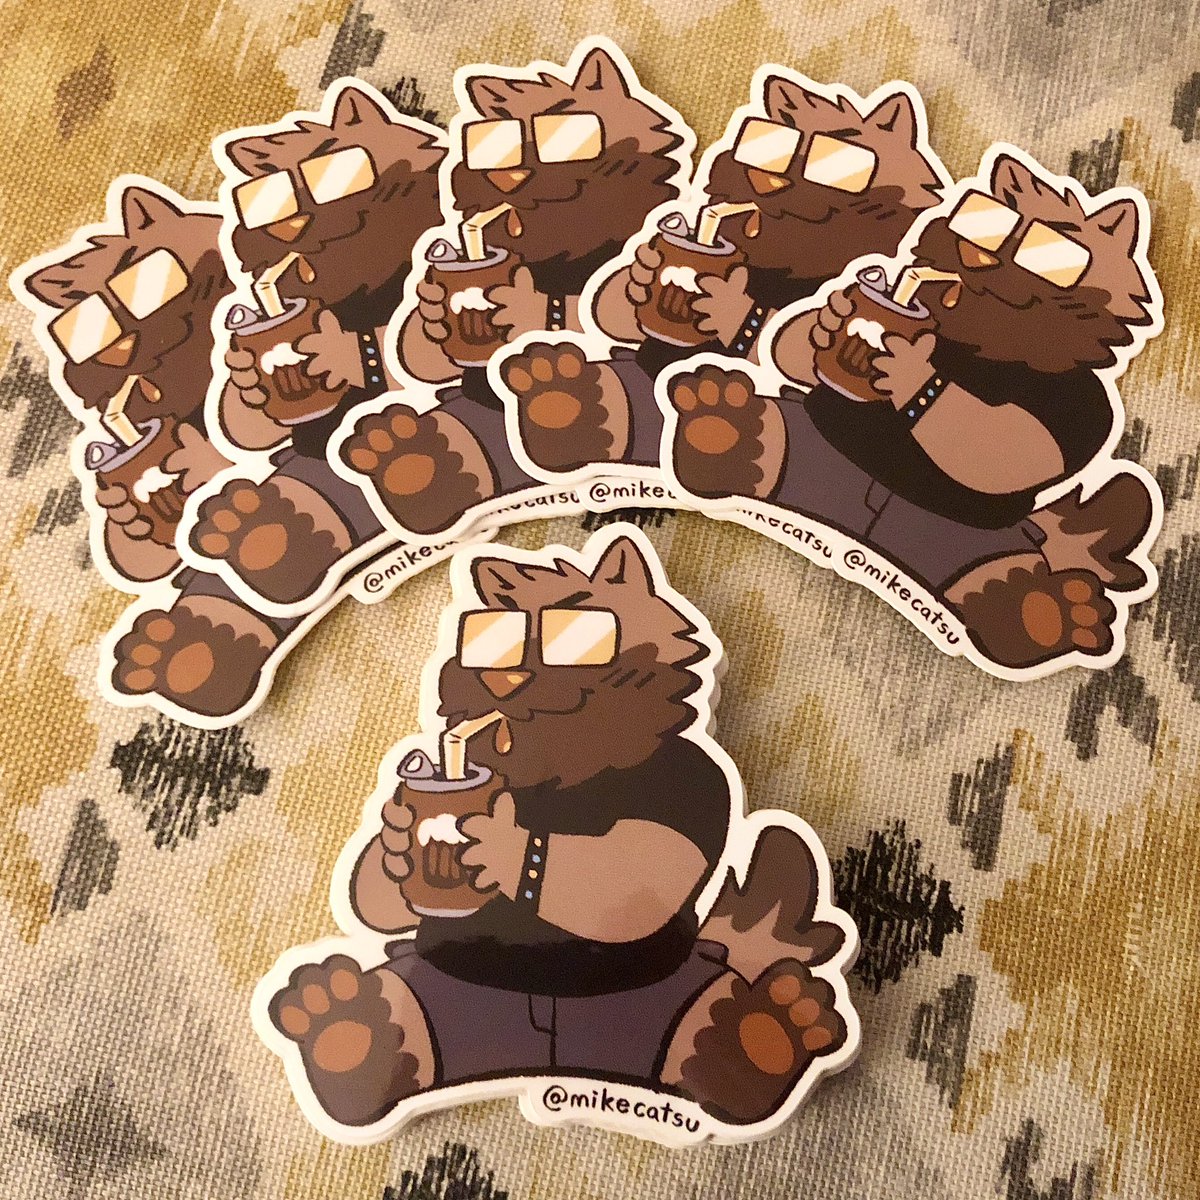 「STICKERS GET!!!! hope to trade y'all at 」|✨mike✨のイラスト